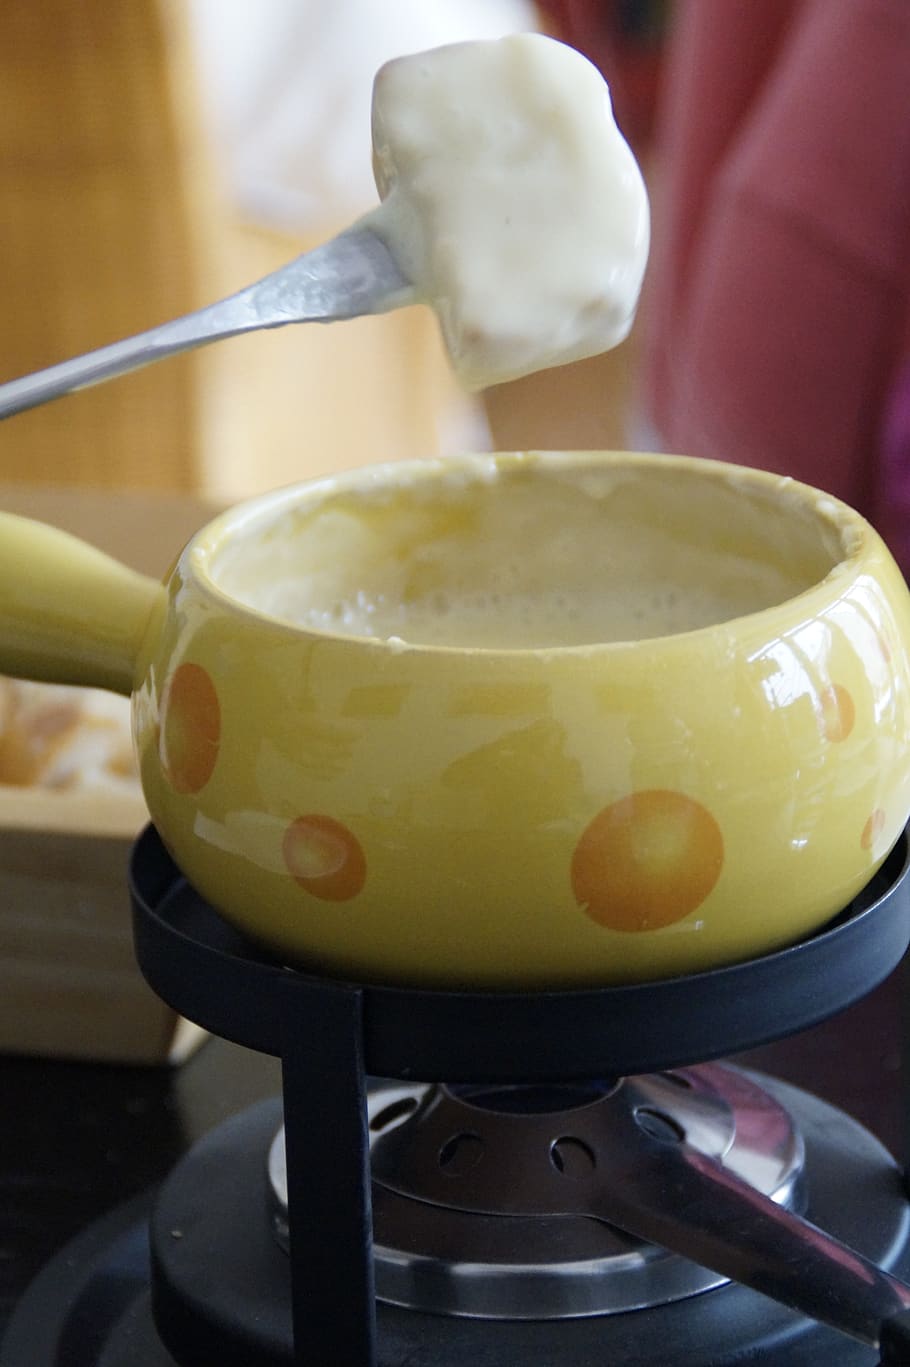 fondue, switzerland, cheese fondue, specialty, food, delicious, national dish, court, eat, meal